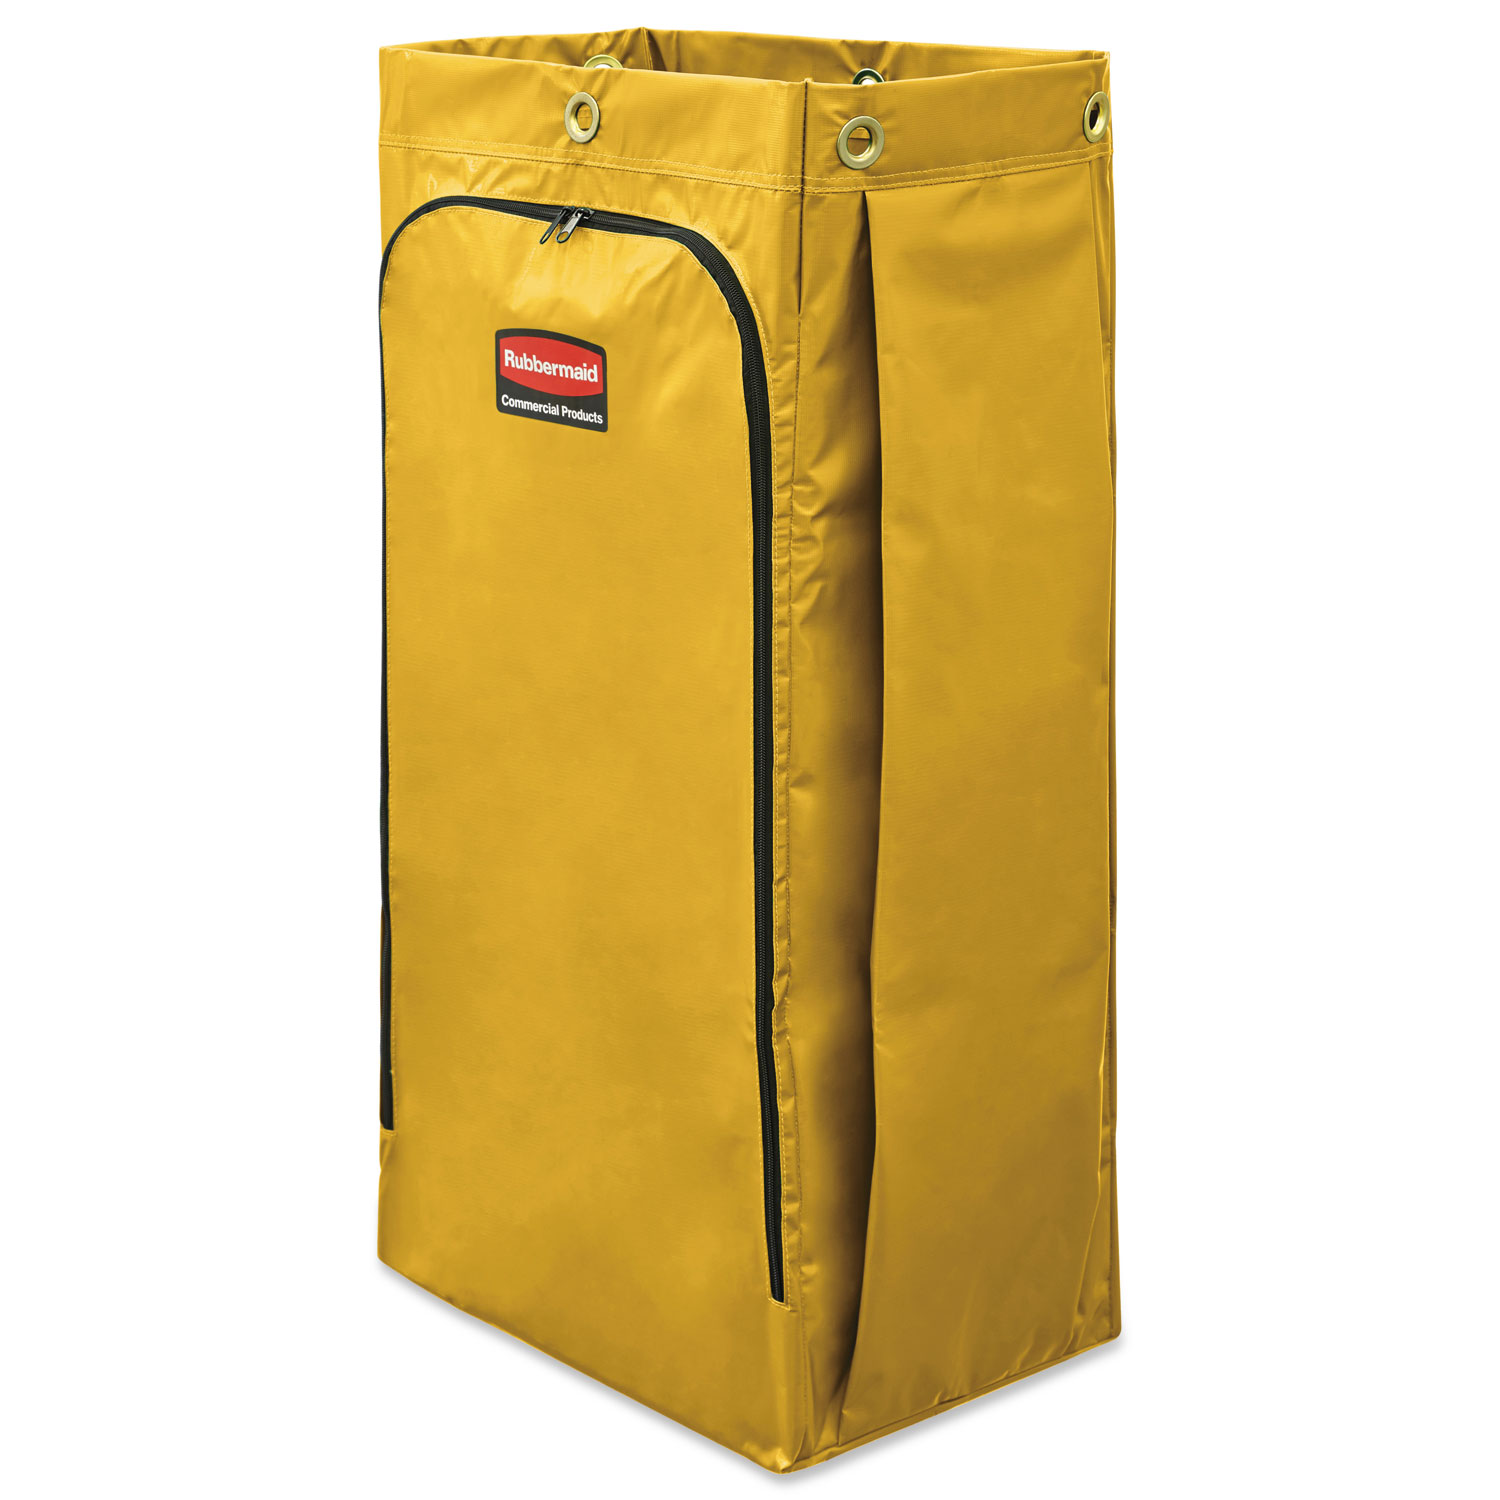 Rubbermaid Commercial Products Cleaning Cart Bag, 34-Gallon, Yellow,  Collecting Refuse or Laundry Items, Janitorial and Housekeeping Carts,  Zippered